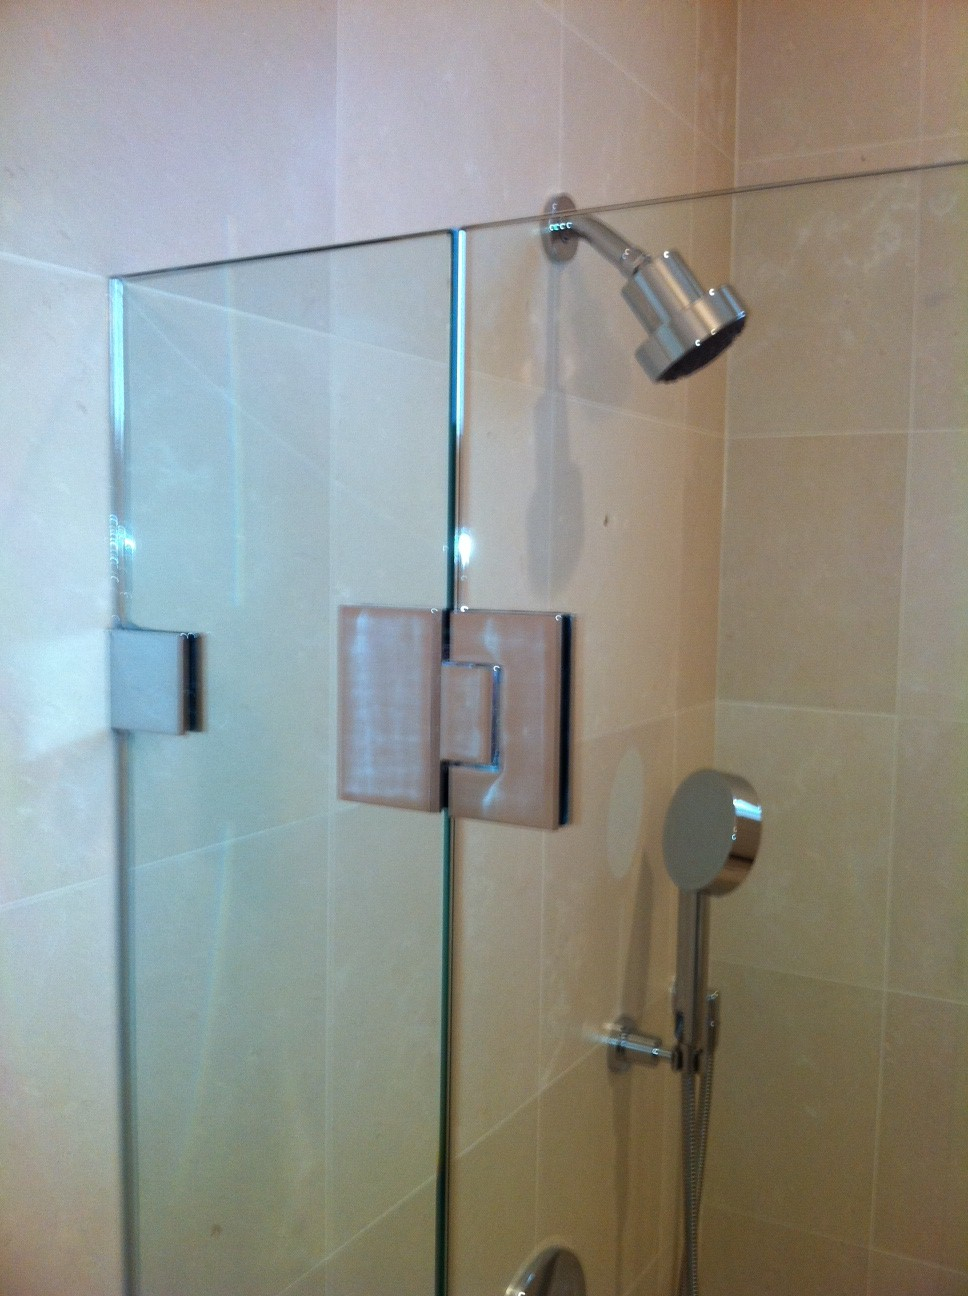 Frameless Shower Door With Cr Laurence Hardware Ot Glass within measurements 968 X 1296